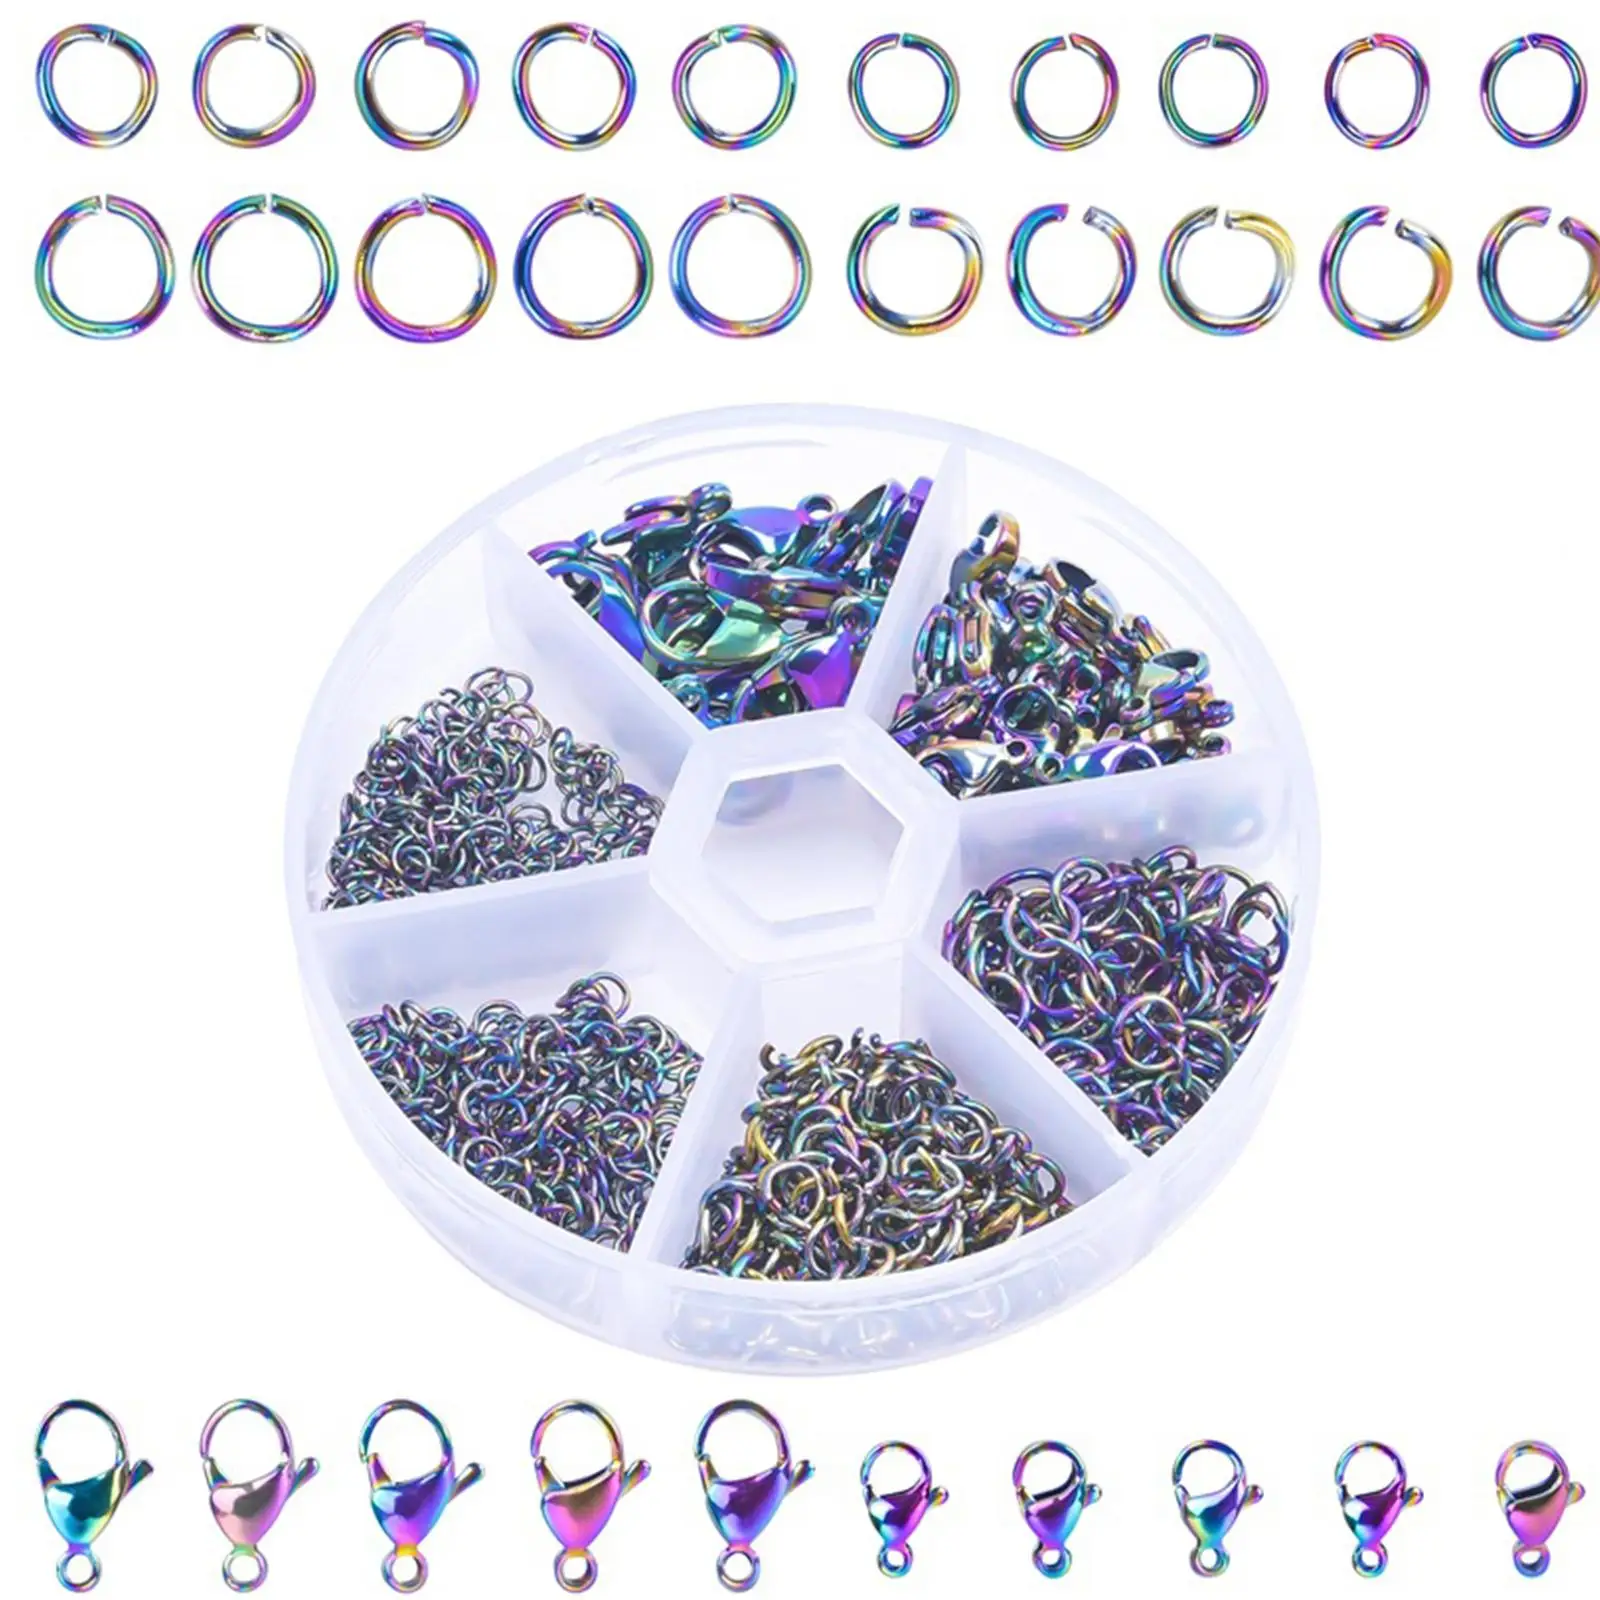 

120 Pieces Lobster Claw Hook and Open Jump Rings Colorful Plating DIY Craft Jewelry Findings Kit for Earrings Supplies Set